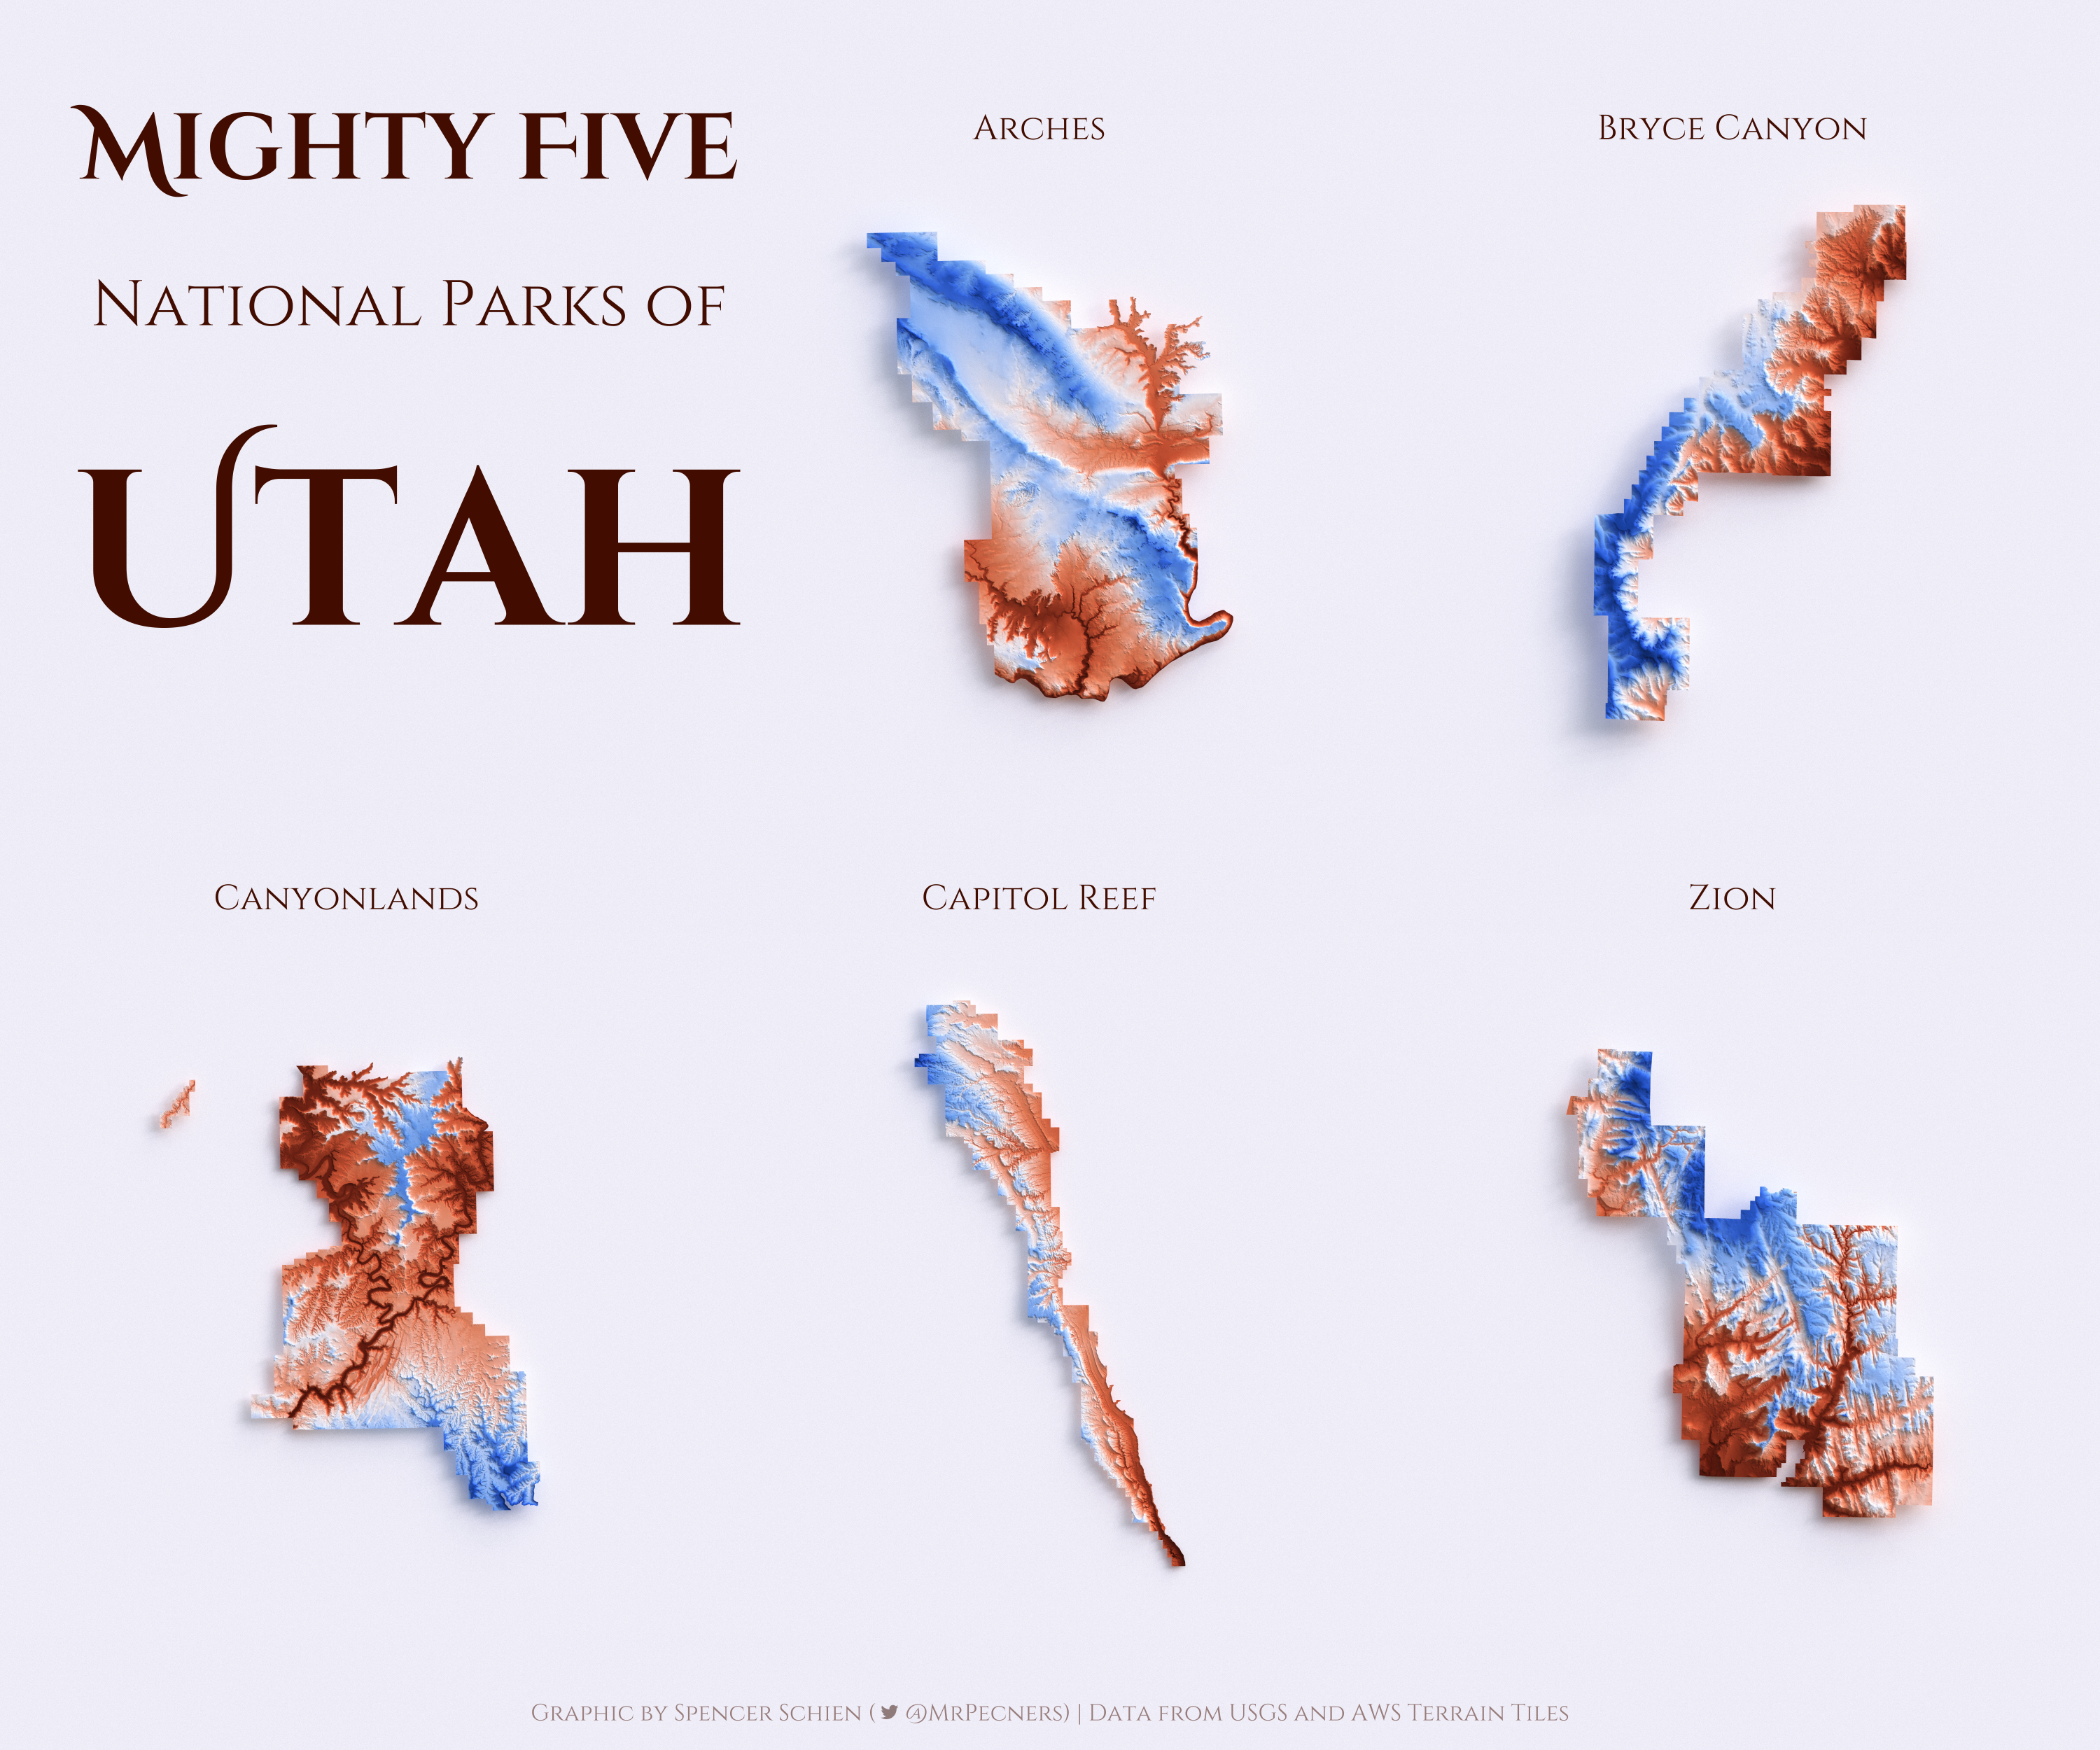 Mighty Five National Parks of Utah